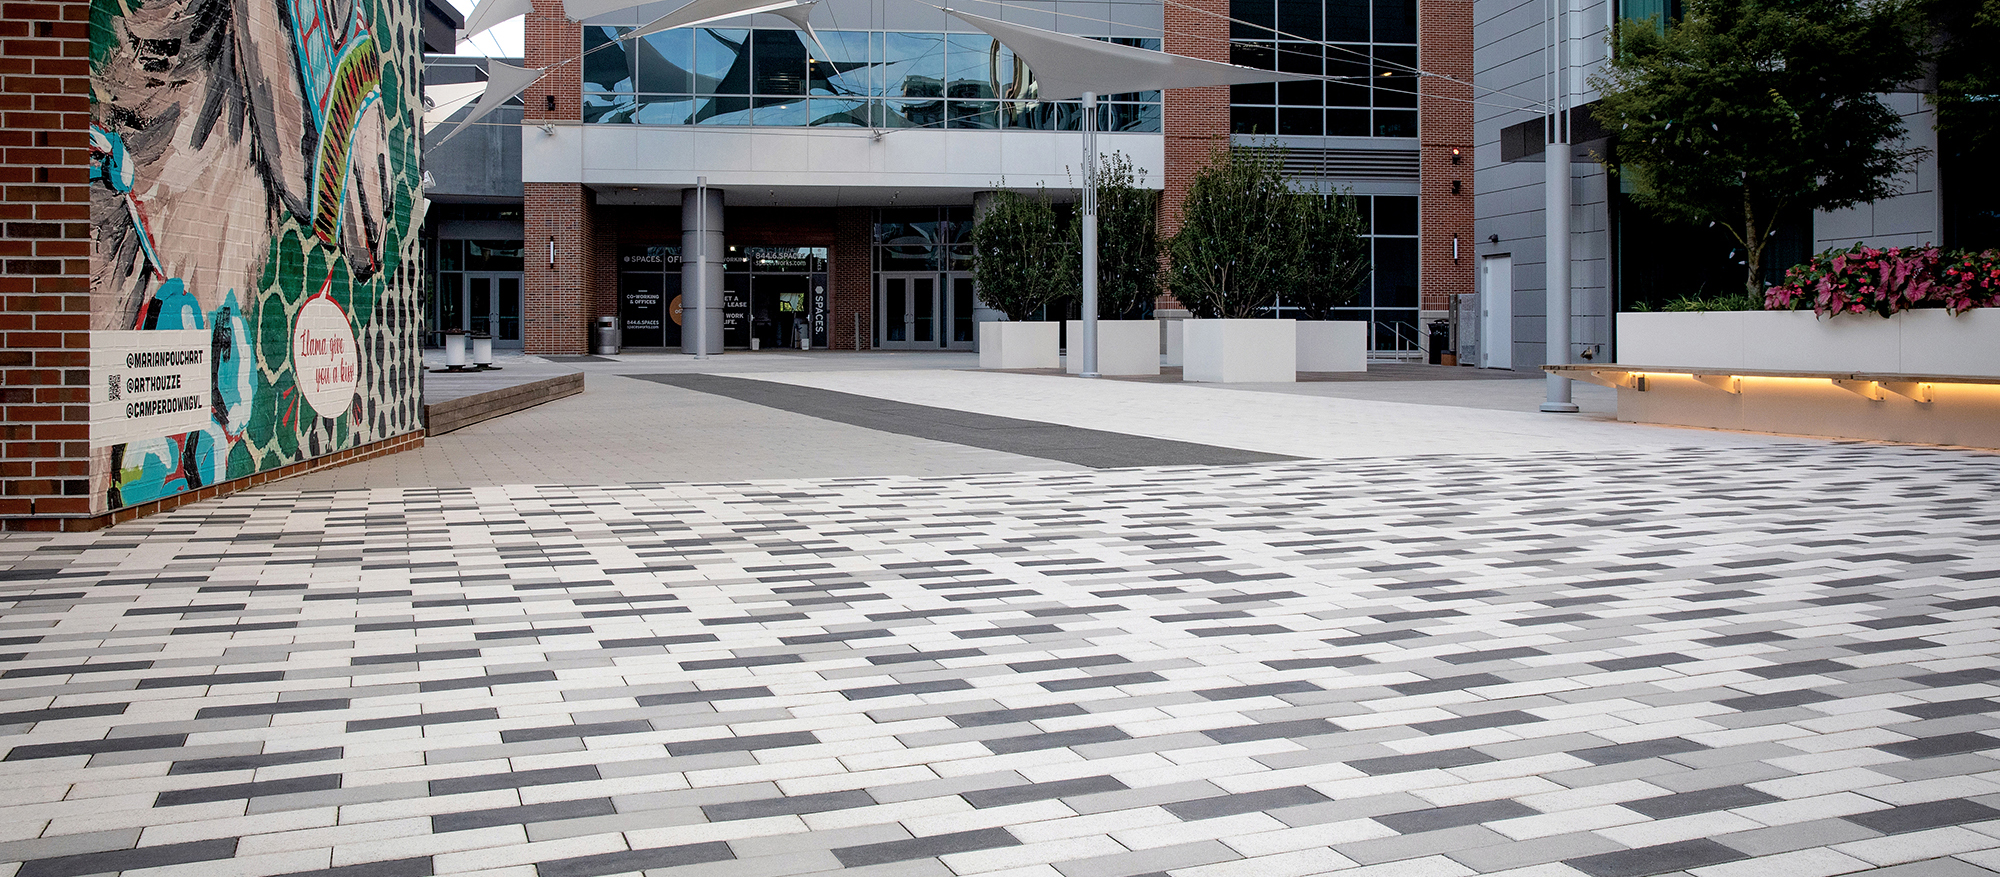 Promenade Plank pavers in a checkboard pattern transition to parallel white and black planks, guiding visitors to the building's entrance.